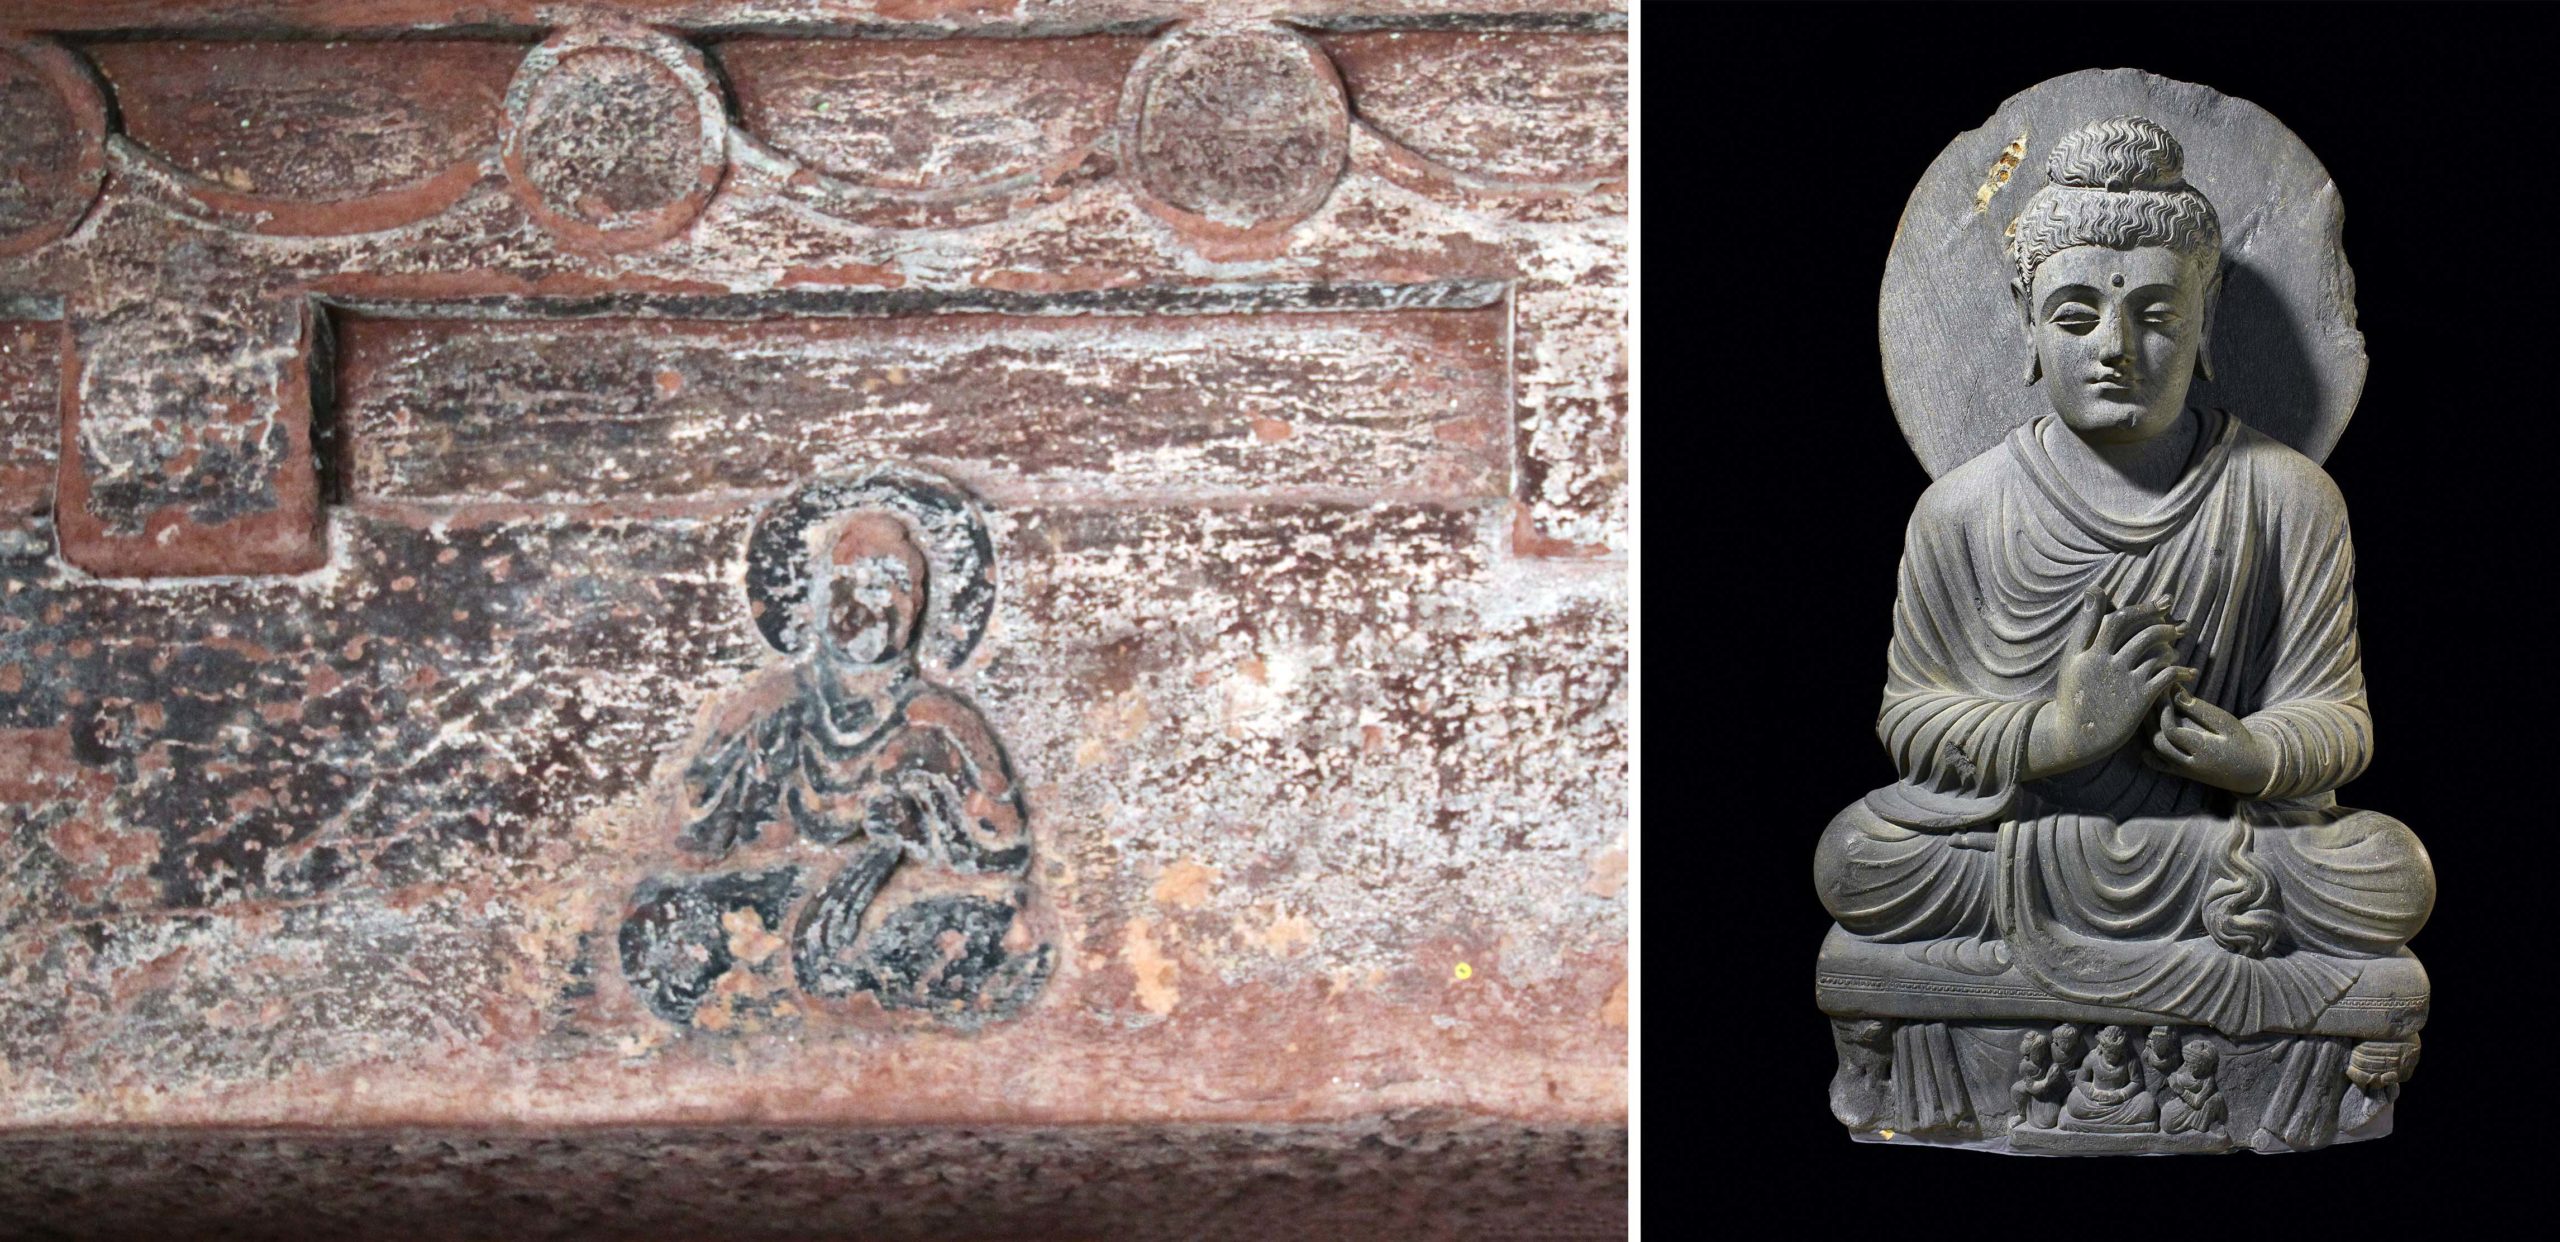 Left: Seated Buddha, Mahao Cliff Tomb, Sichuan Province, Eastern Han Dynasty, late 2nd century C.E., Gary Todd; right: Seated Buddha from Gandhara, c. 2nd–3rd century C.E., Gandhara, schist (British Museum